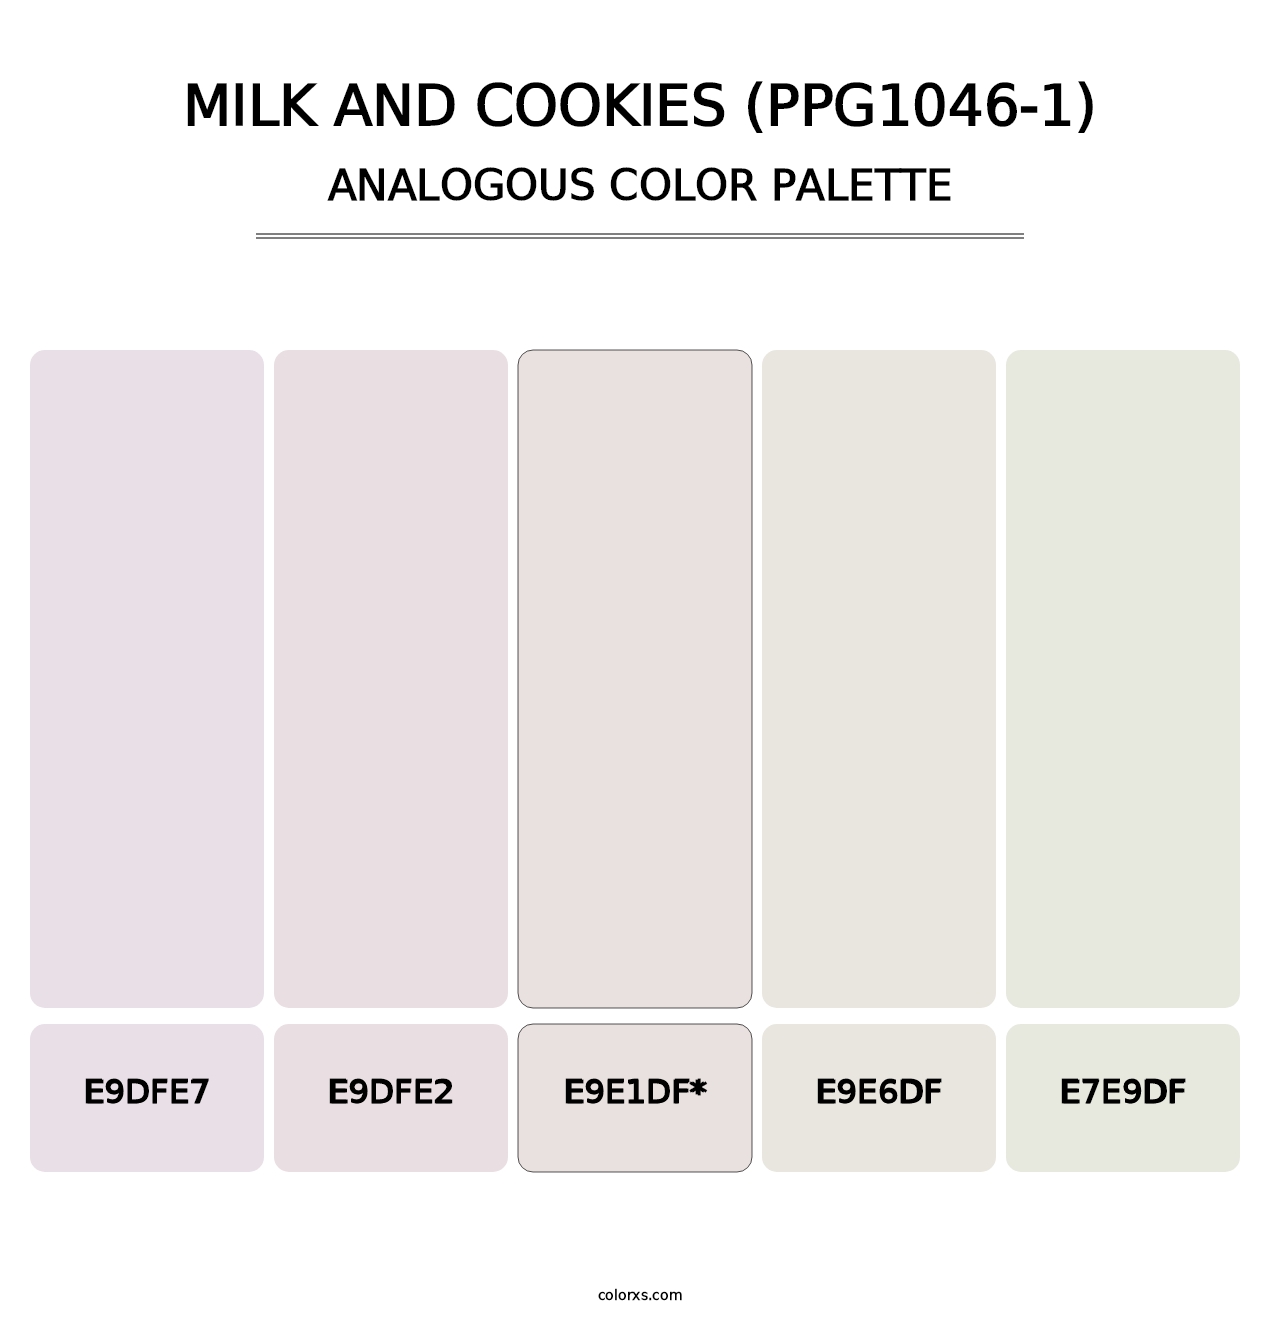 Milk And Cookies (PPG1046-1) - Analogous Color Palette